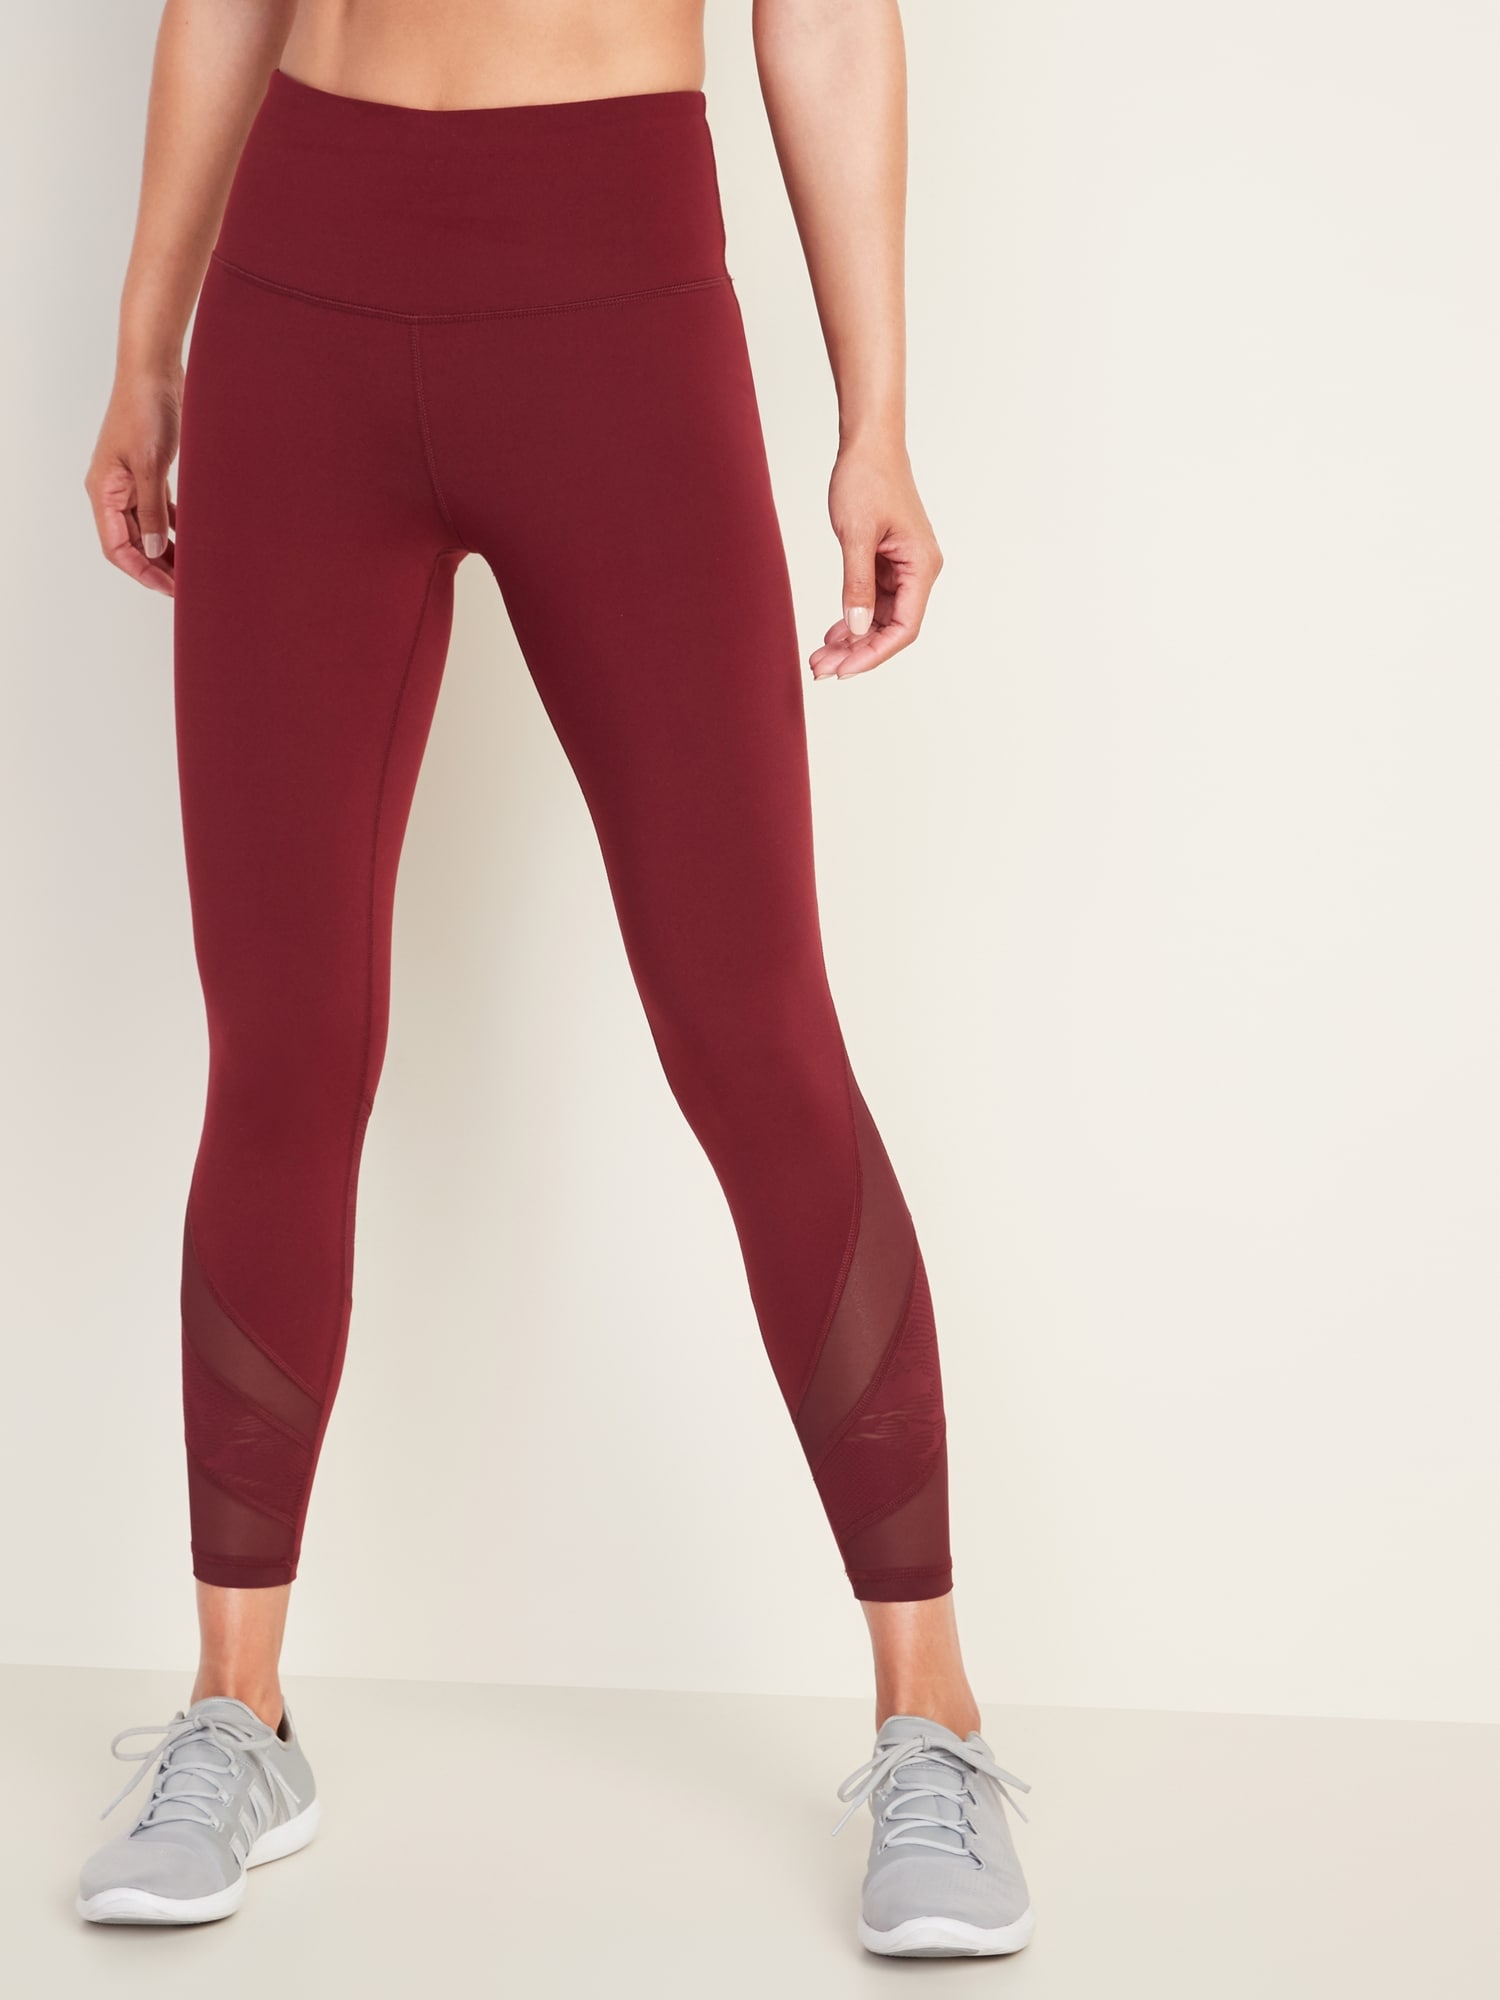 ⭐️ 2/$20 high Waisted Elevate Compression Leggings Tall